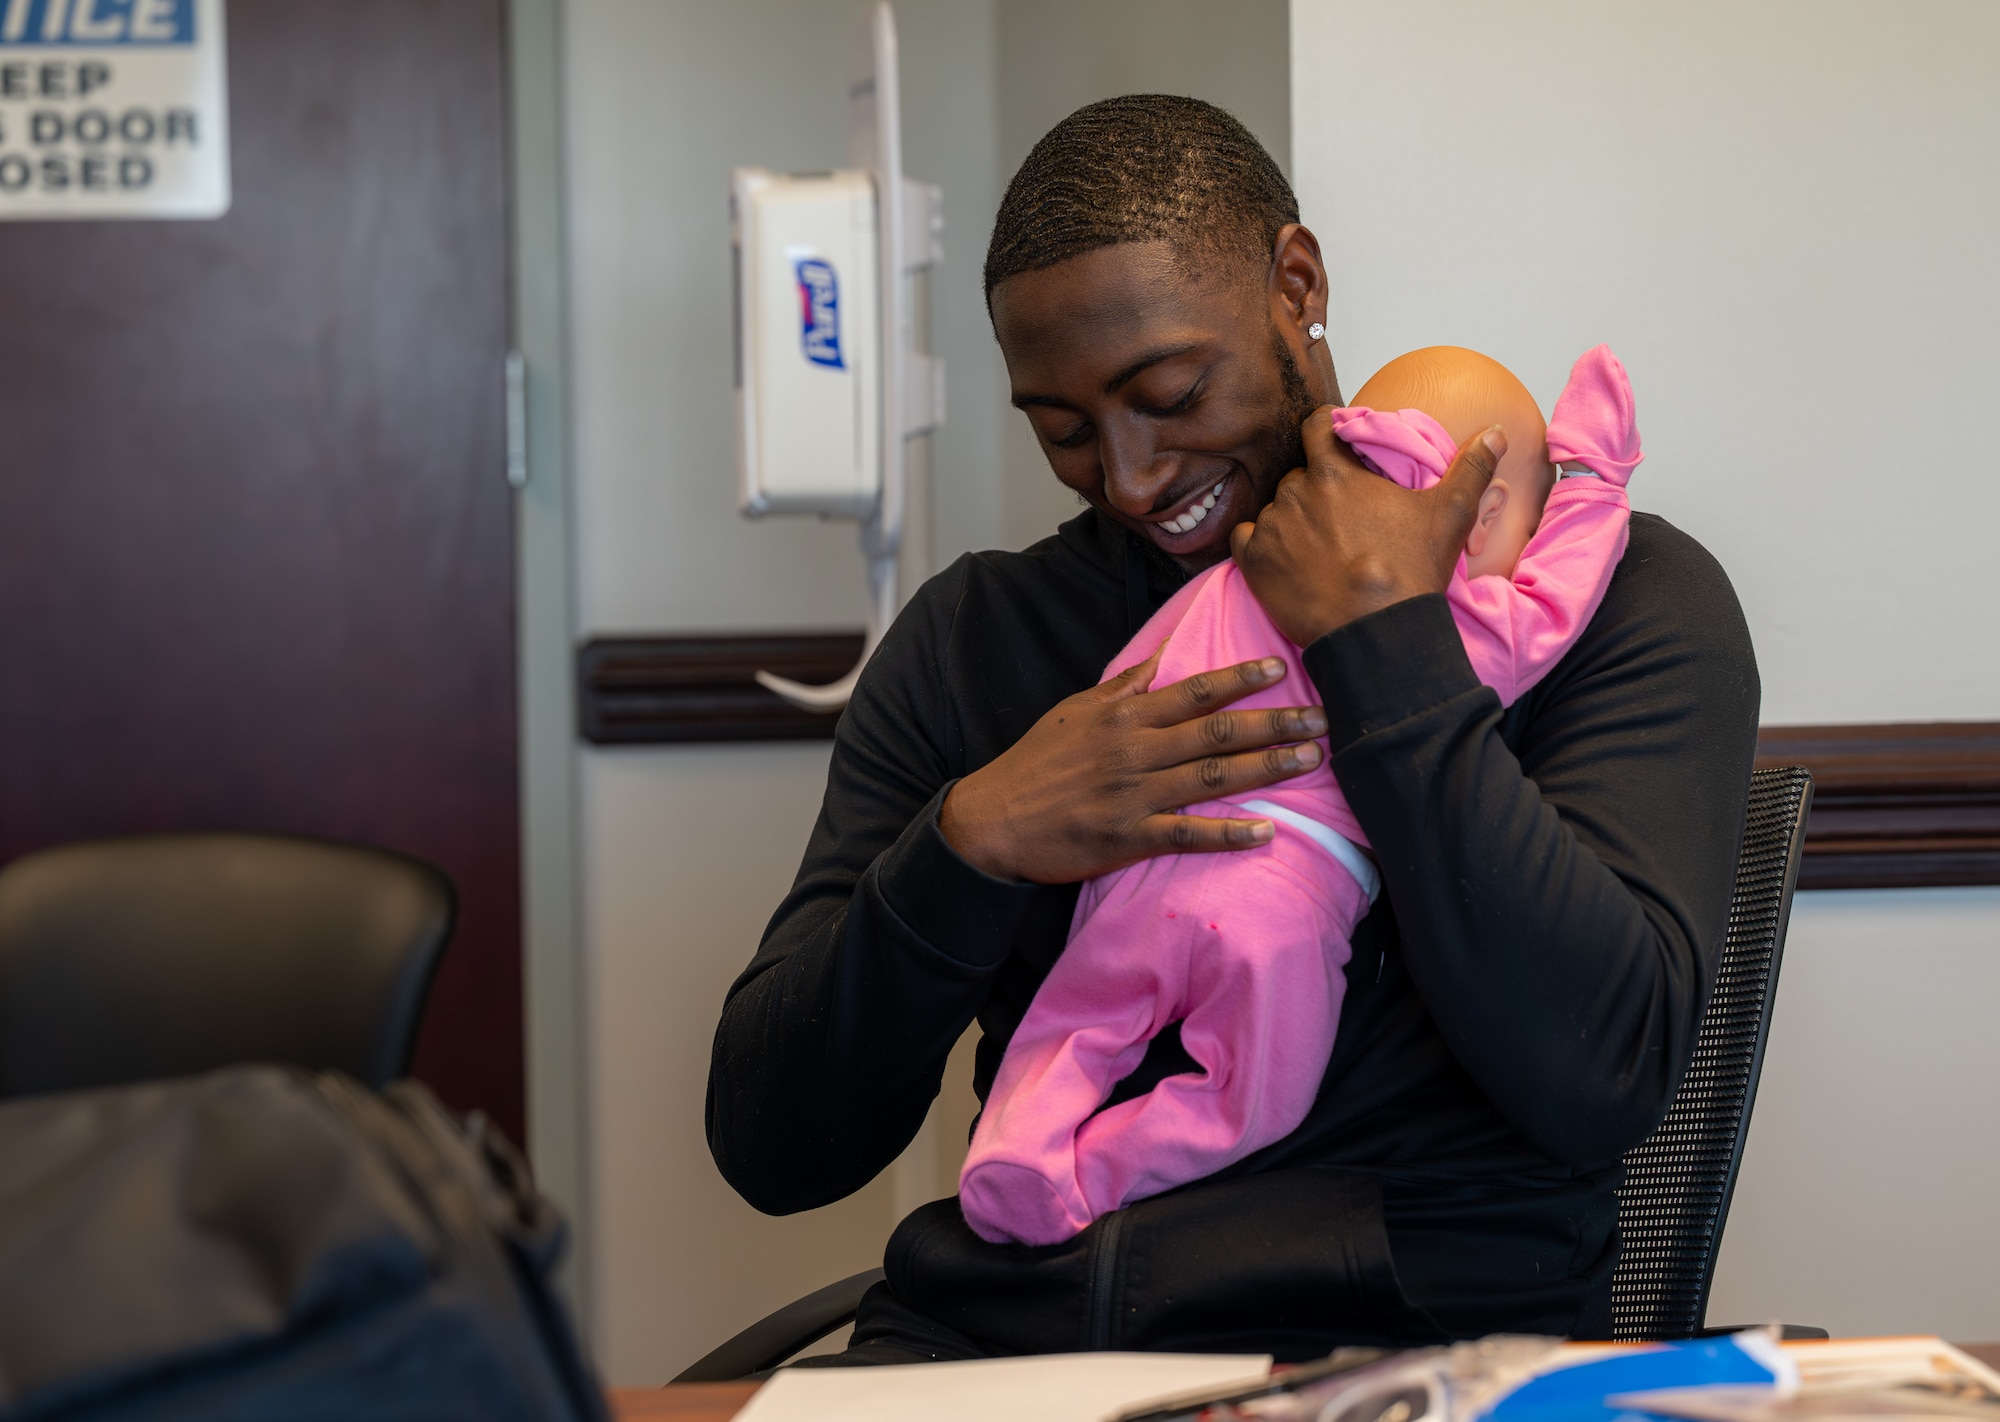 An airman holds a crying doll